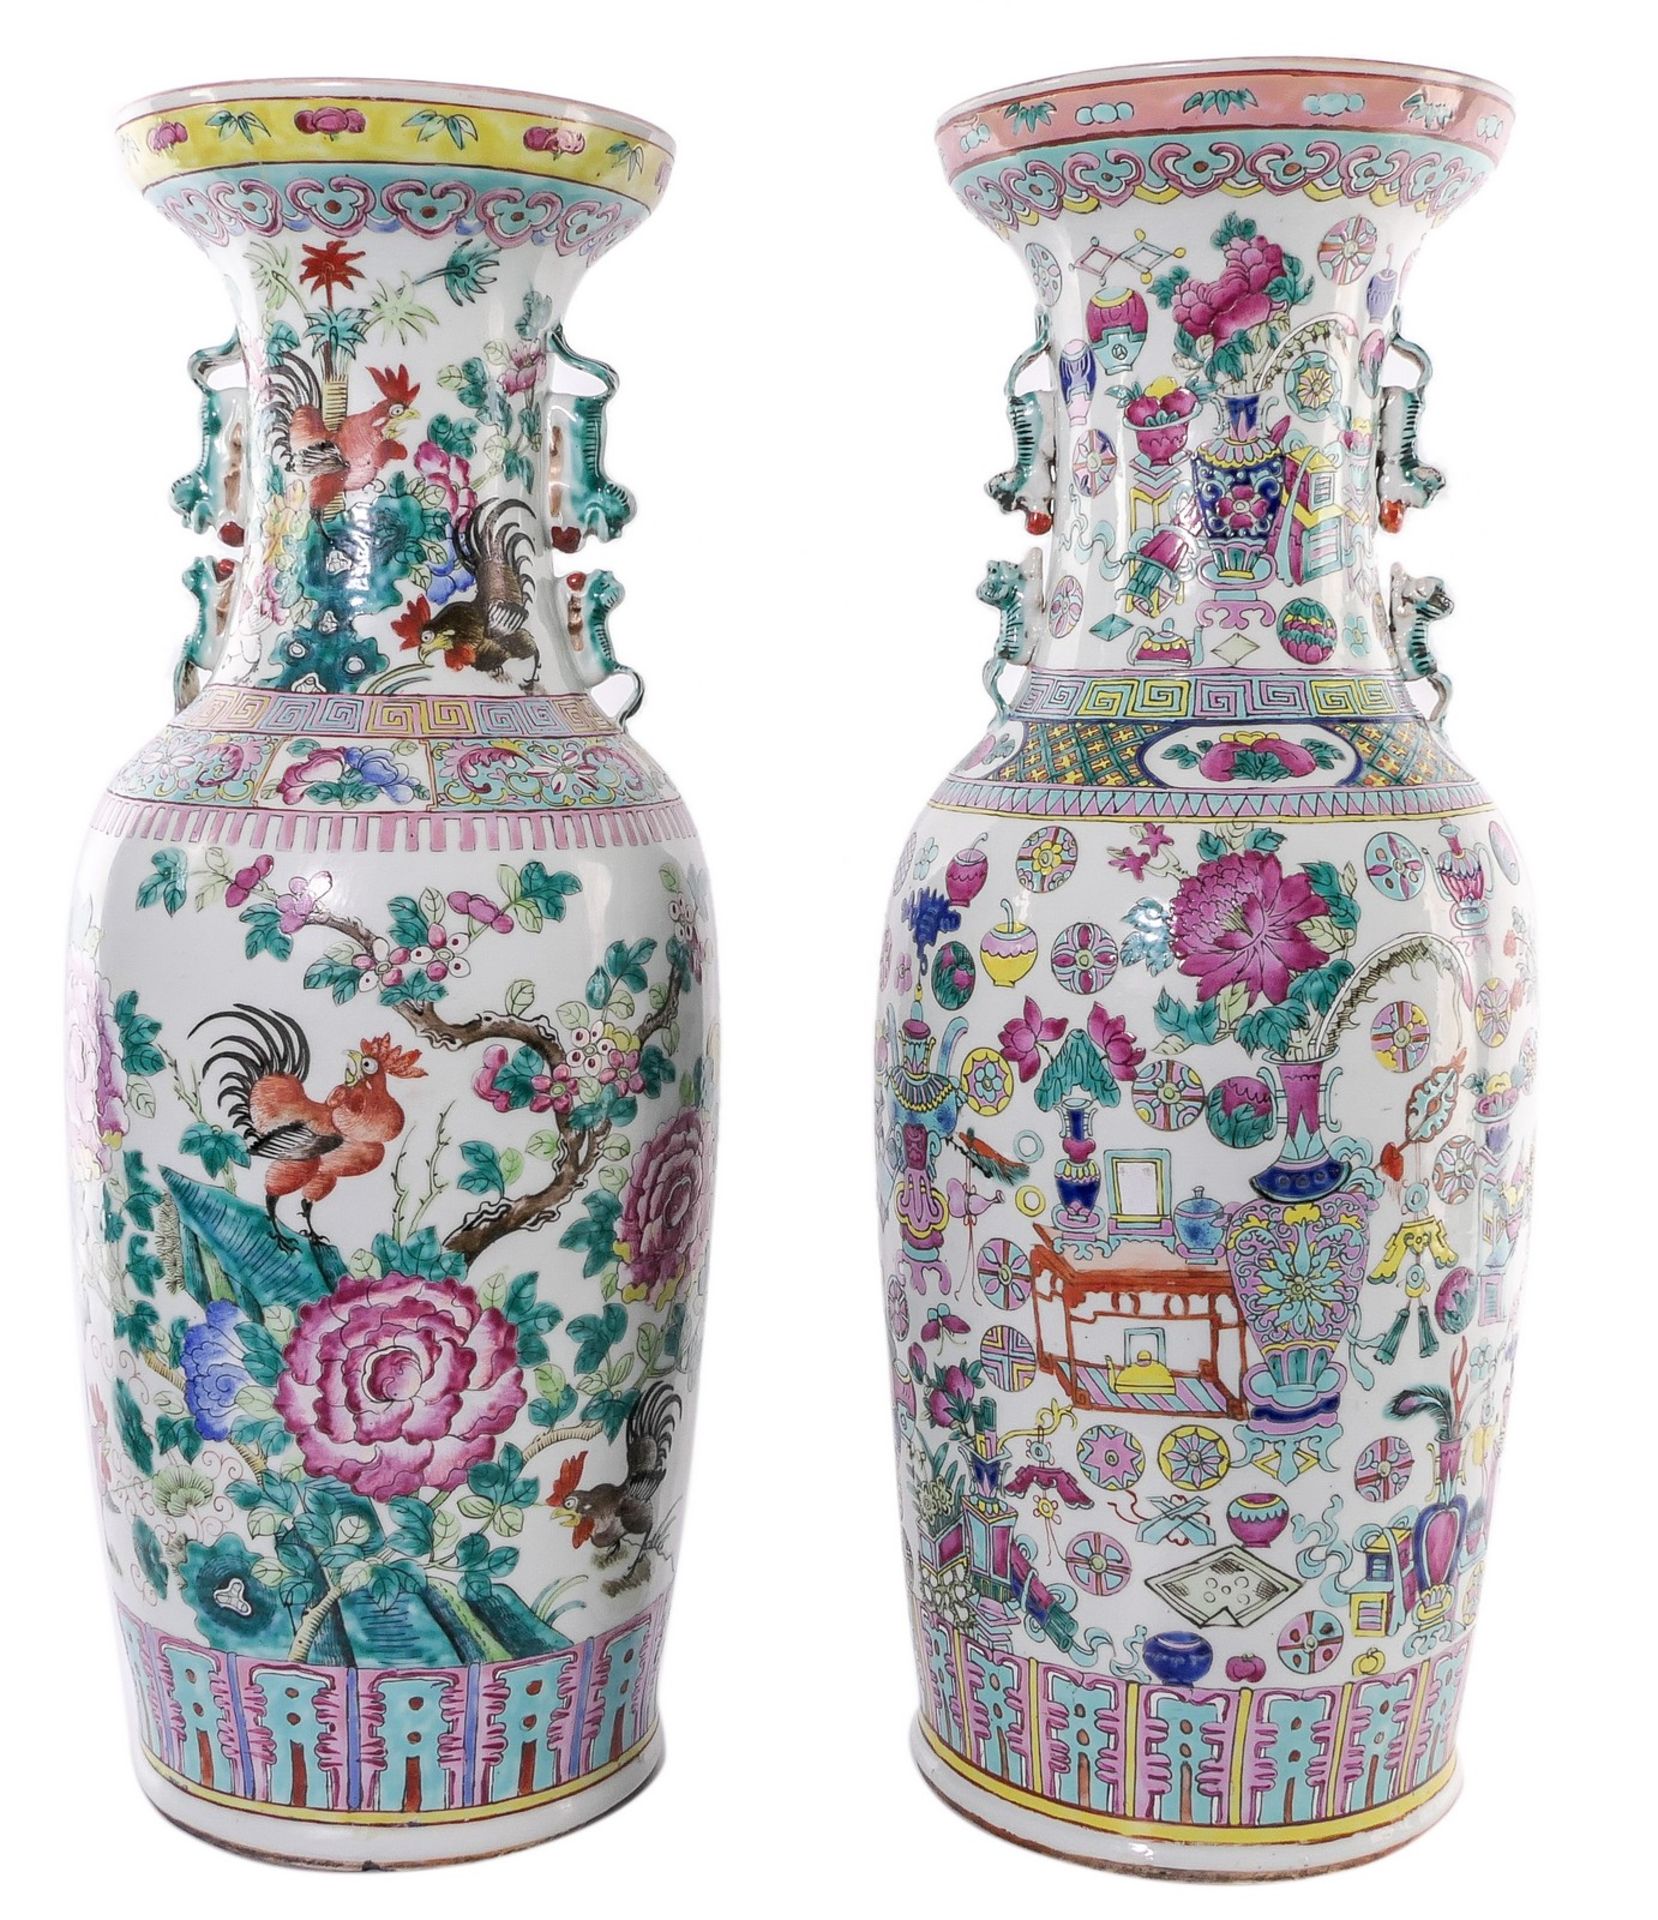 Two Chinese famille rose vases, one decorated with cocks and one with 100 antiquities, H 59 - 60,5